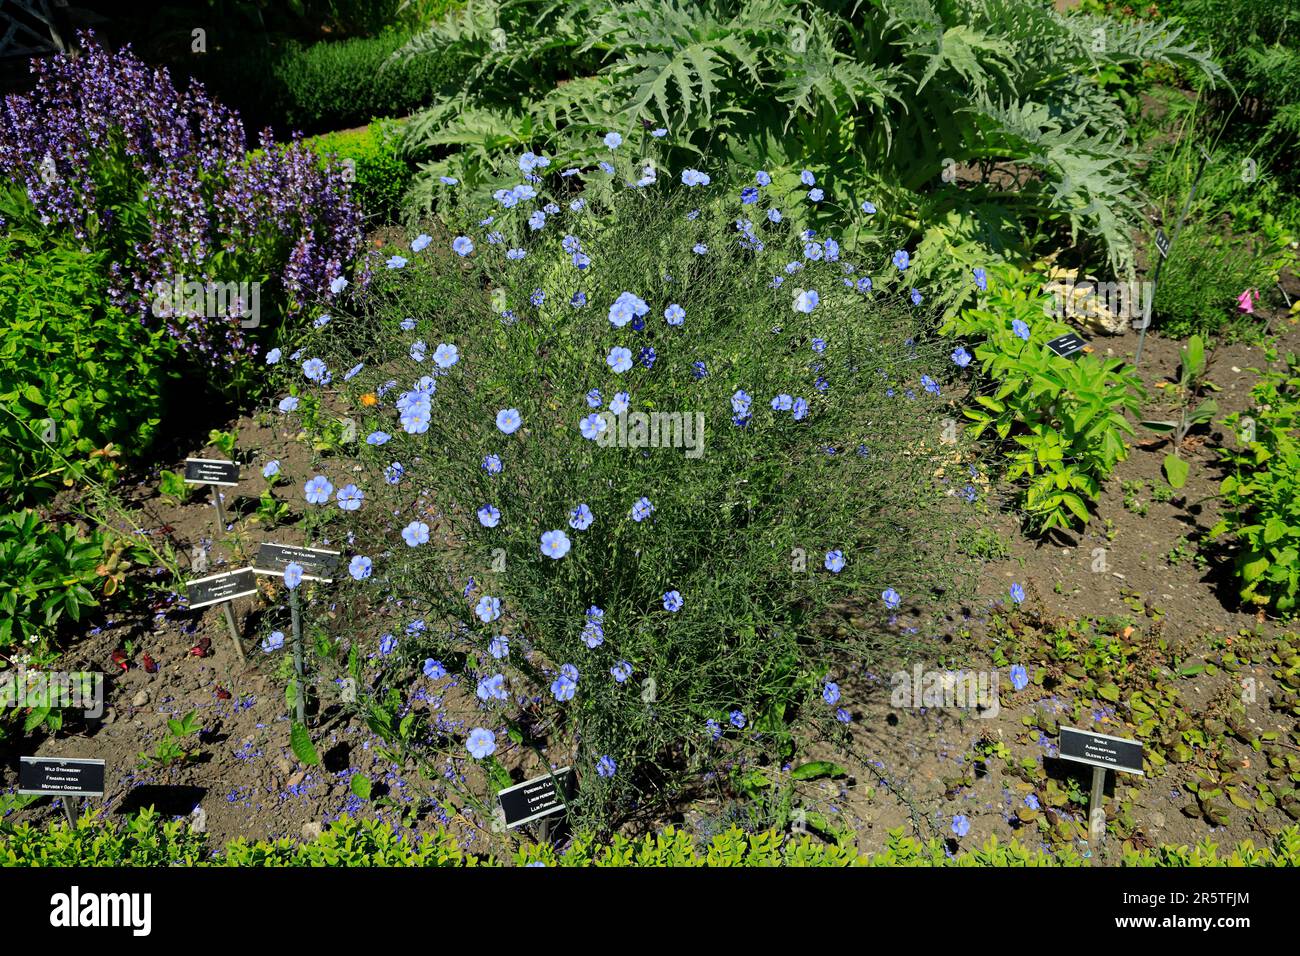 Perennial Flax, linum perenne, Physic Garden, Cowbridge, Vale of Glamorgan, South Wales, UK. Stock Photo